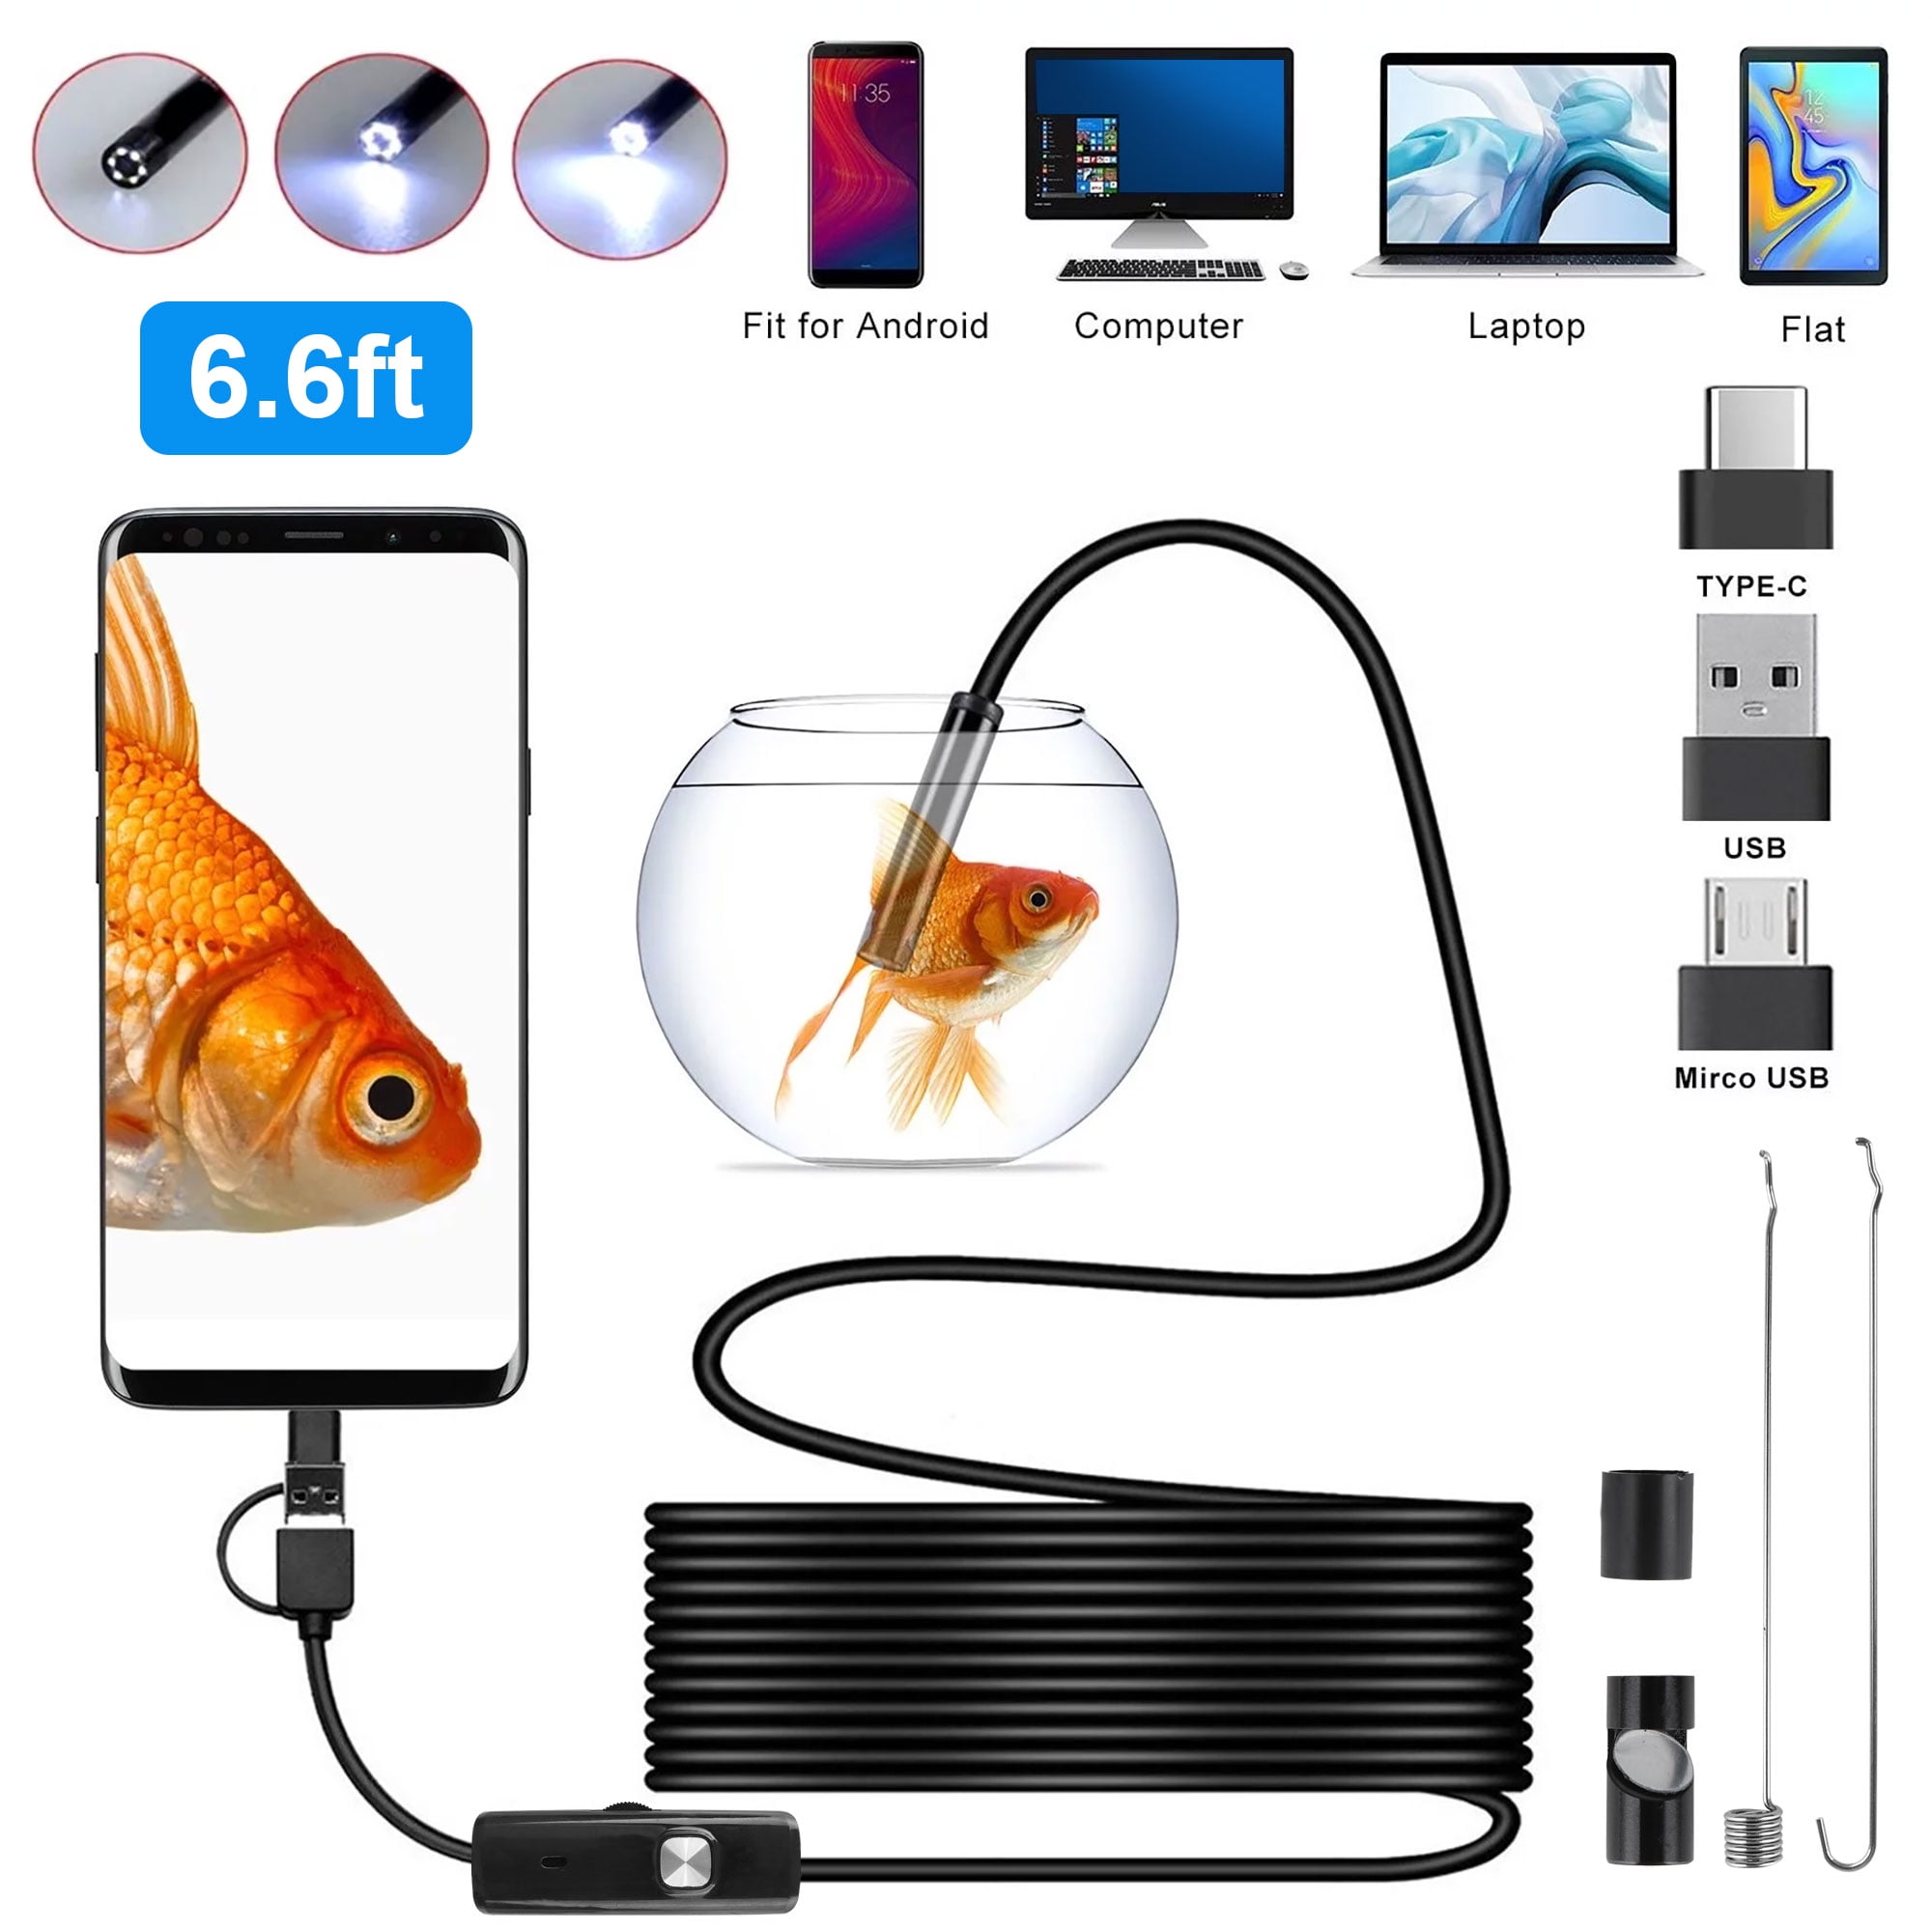 EEEkit 3.3ft USB Endoscope Compatible with Android Phone, 7mm